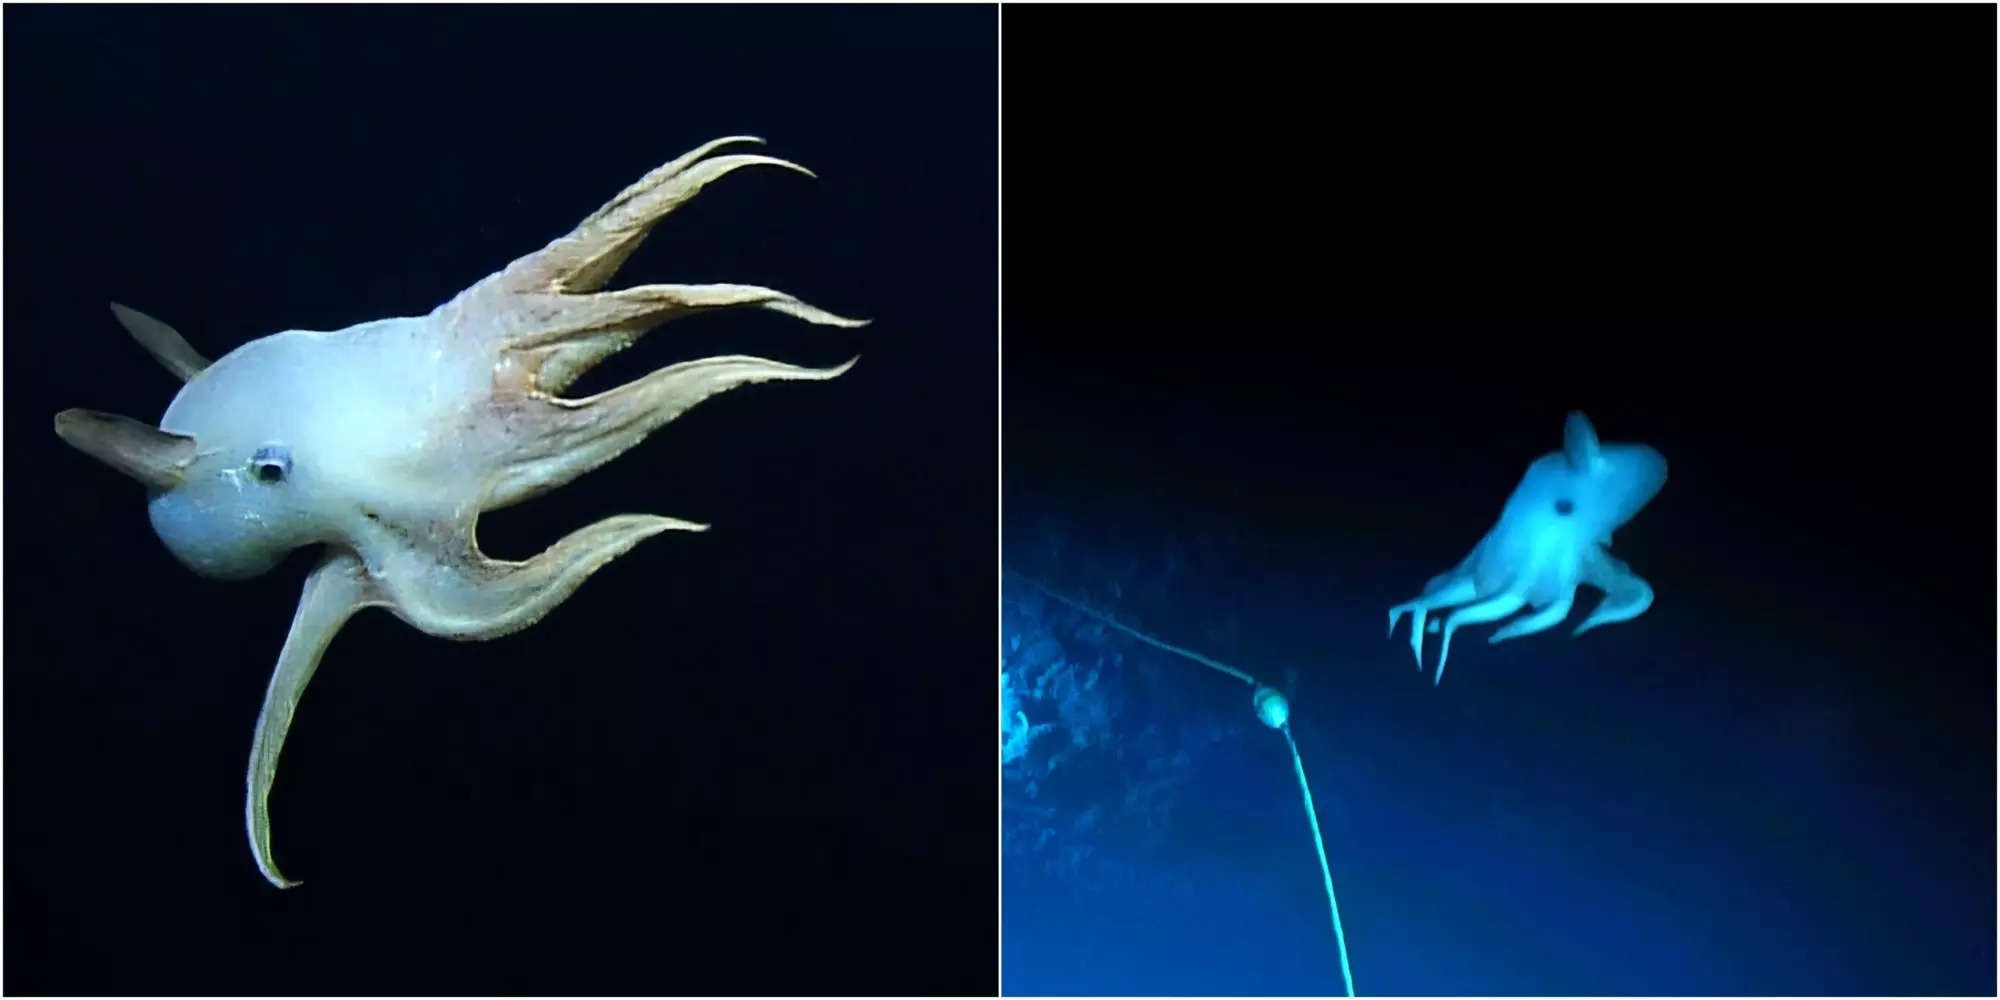 Stills from the video shows the dumbo octopus. On the left, it is seen extending its tentacles, it